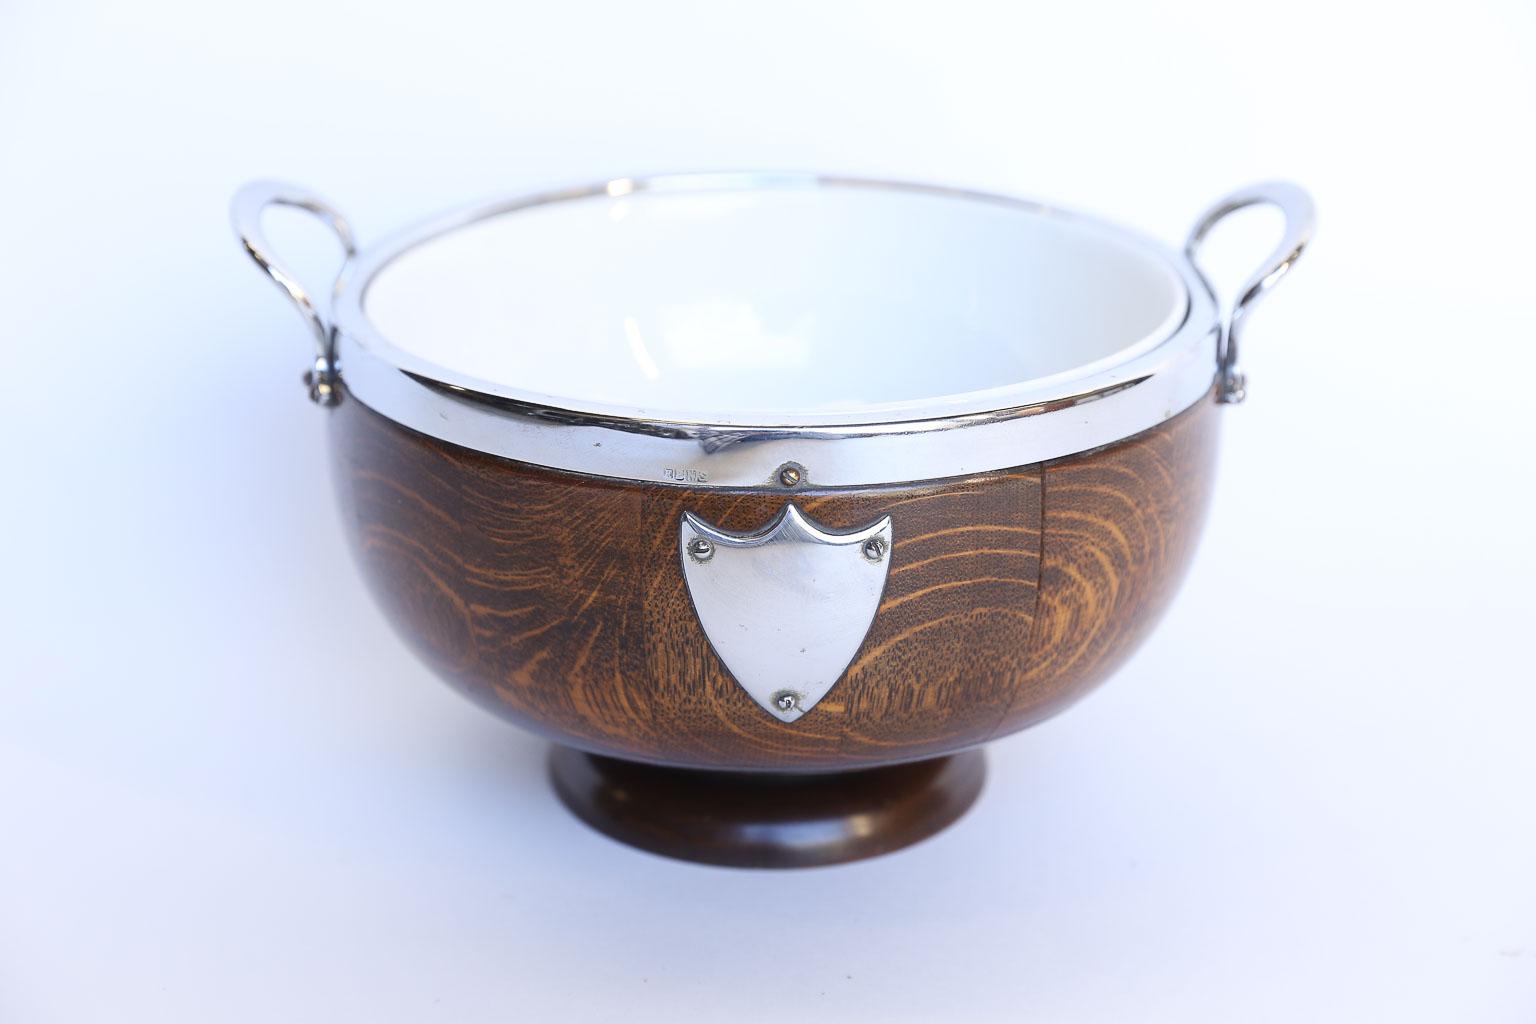 Antique English pedestal bowl made from the traditional English oak with silver plate rim, handles and trophy shield. The removable ironstone interior bowl measures 8.5